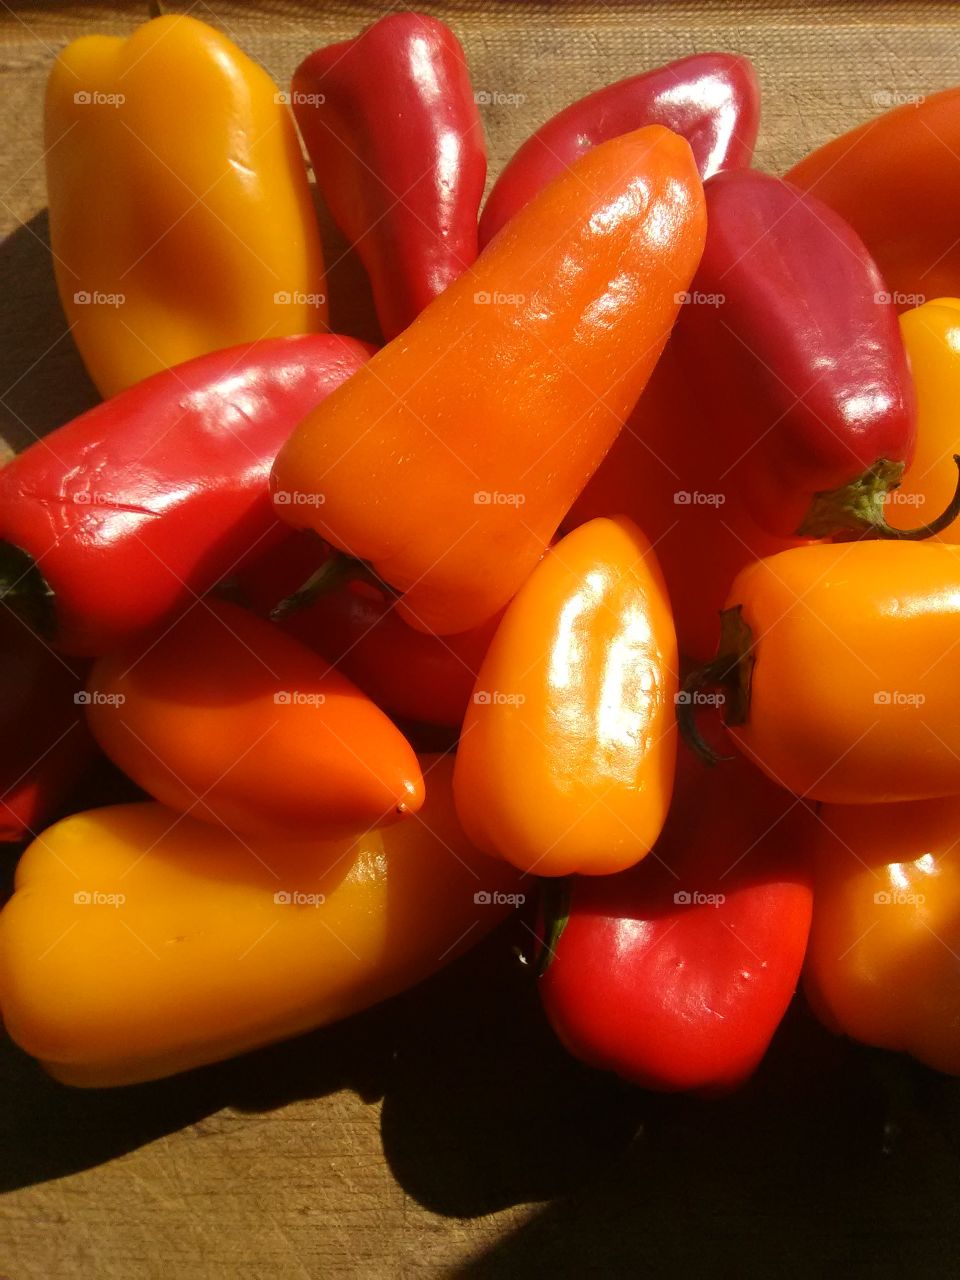 feeling a Mexican food vibe with these bright and colorful peppers.